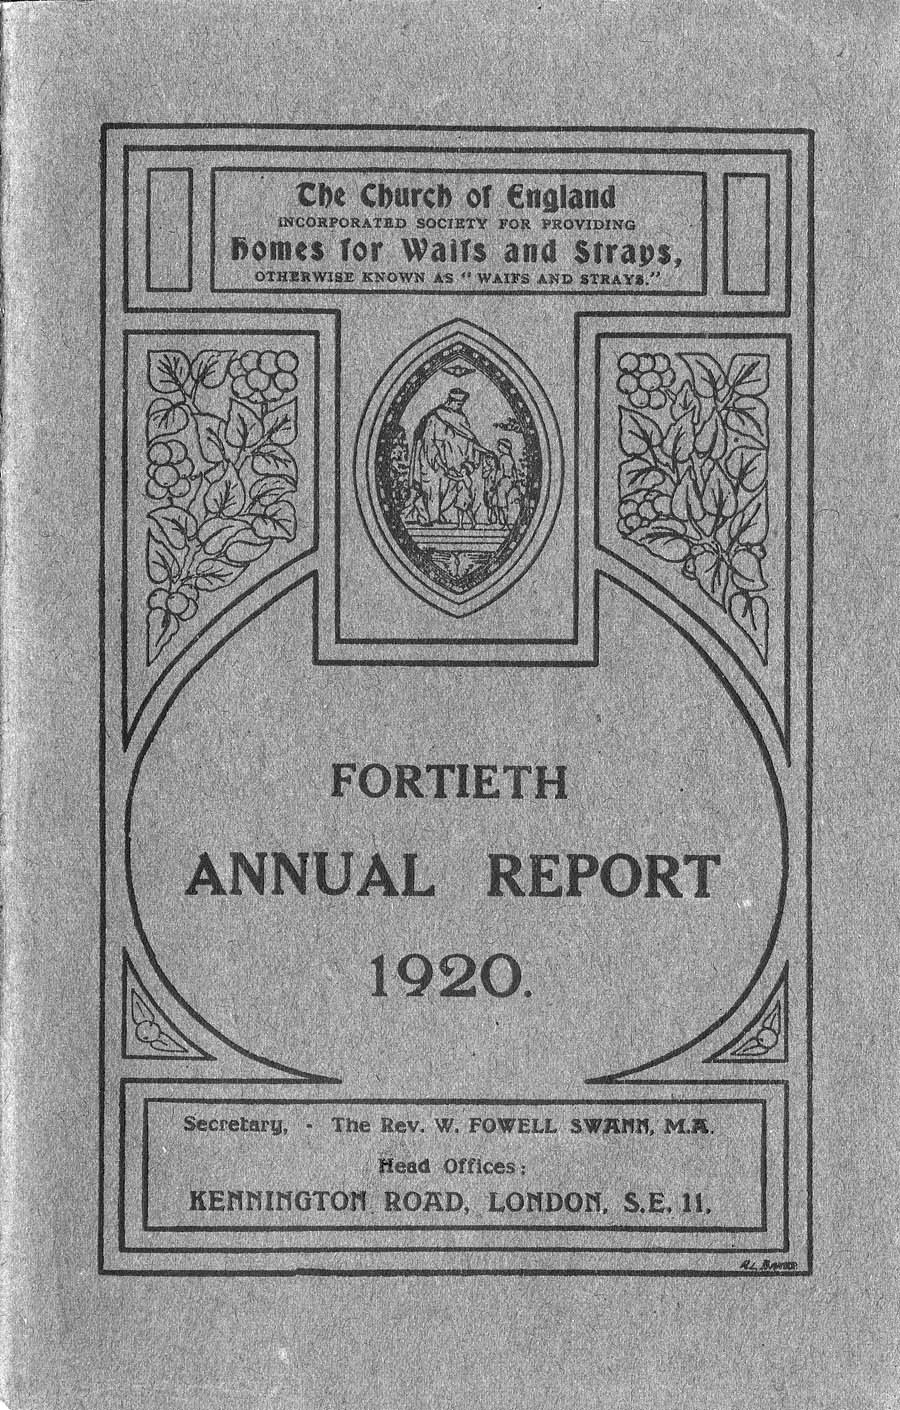 Annual Report 1920 - page 1